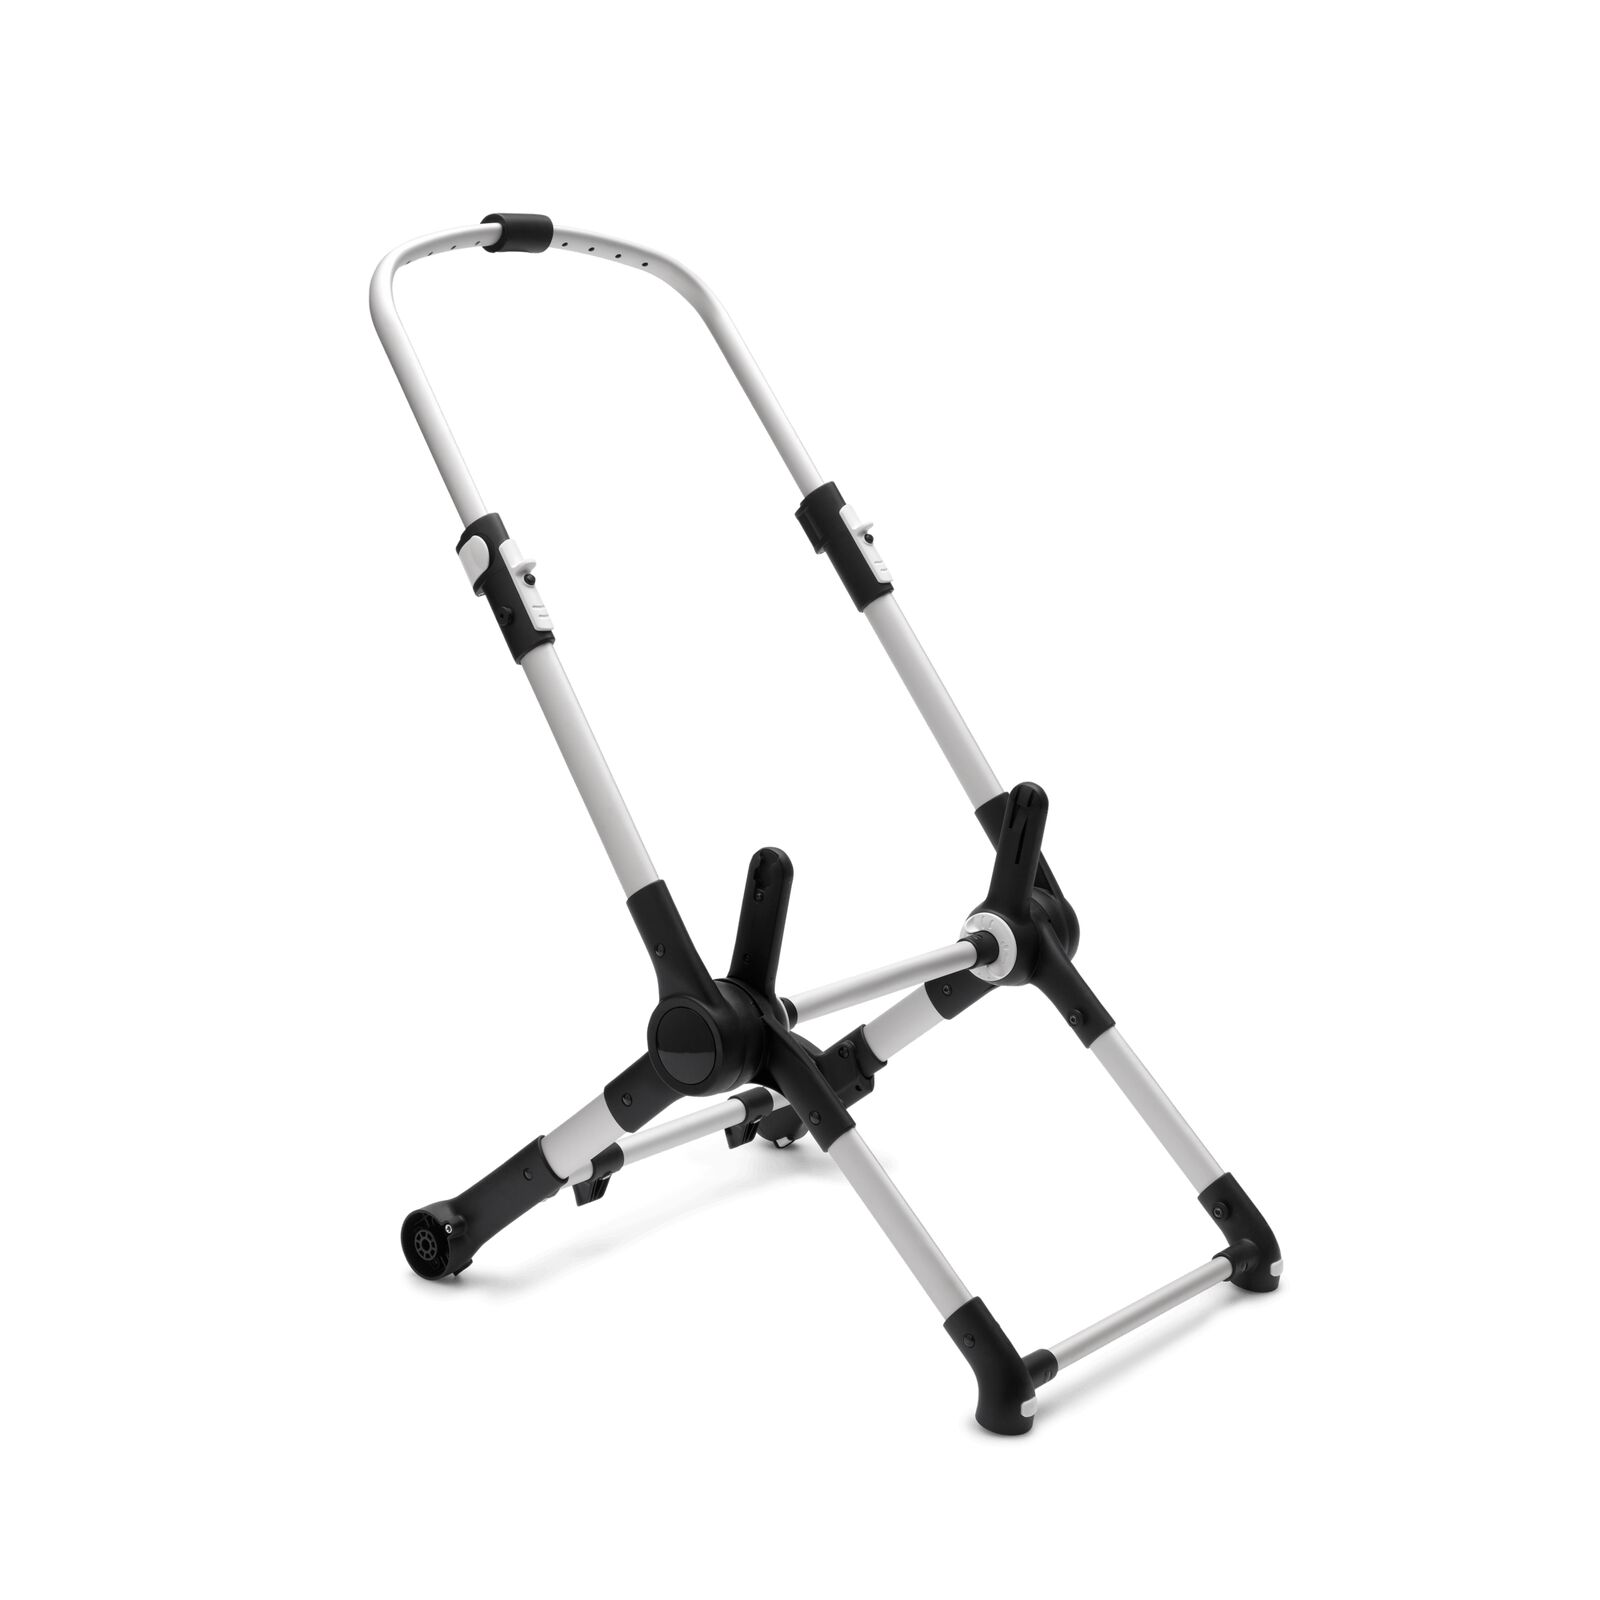 Bugaboo Fox 2 chassis - View 1